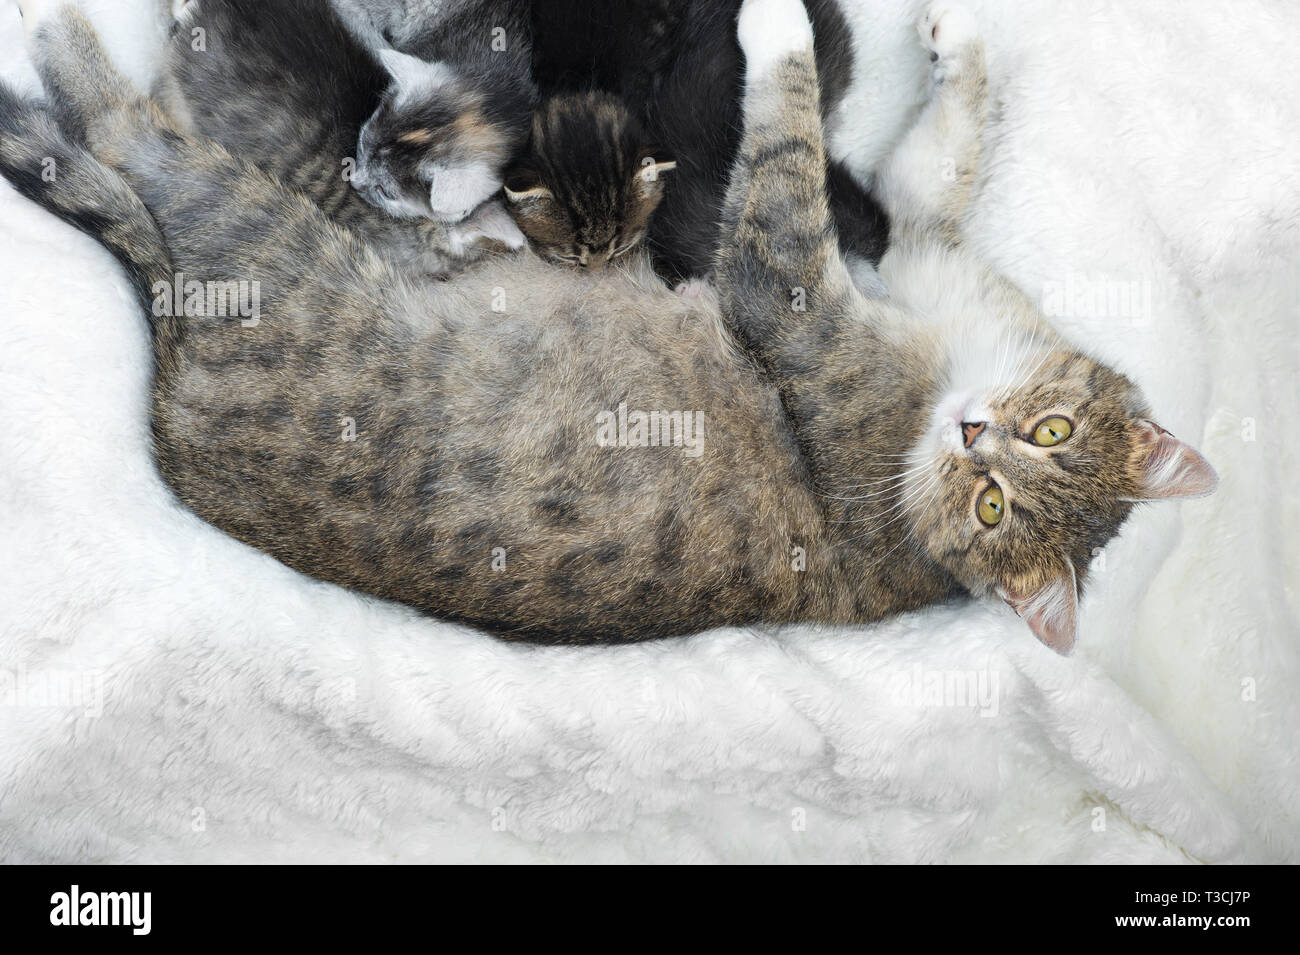 Mother cat  nursing baby kittens. Kittens feed on milk from their mother.Flat lay. Stock Photo